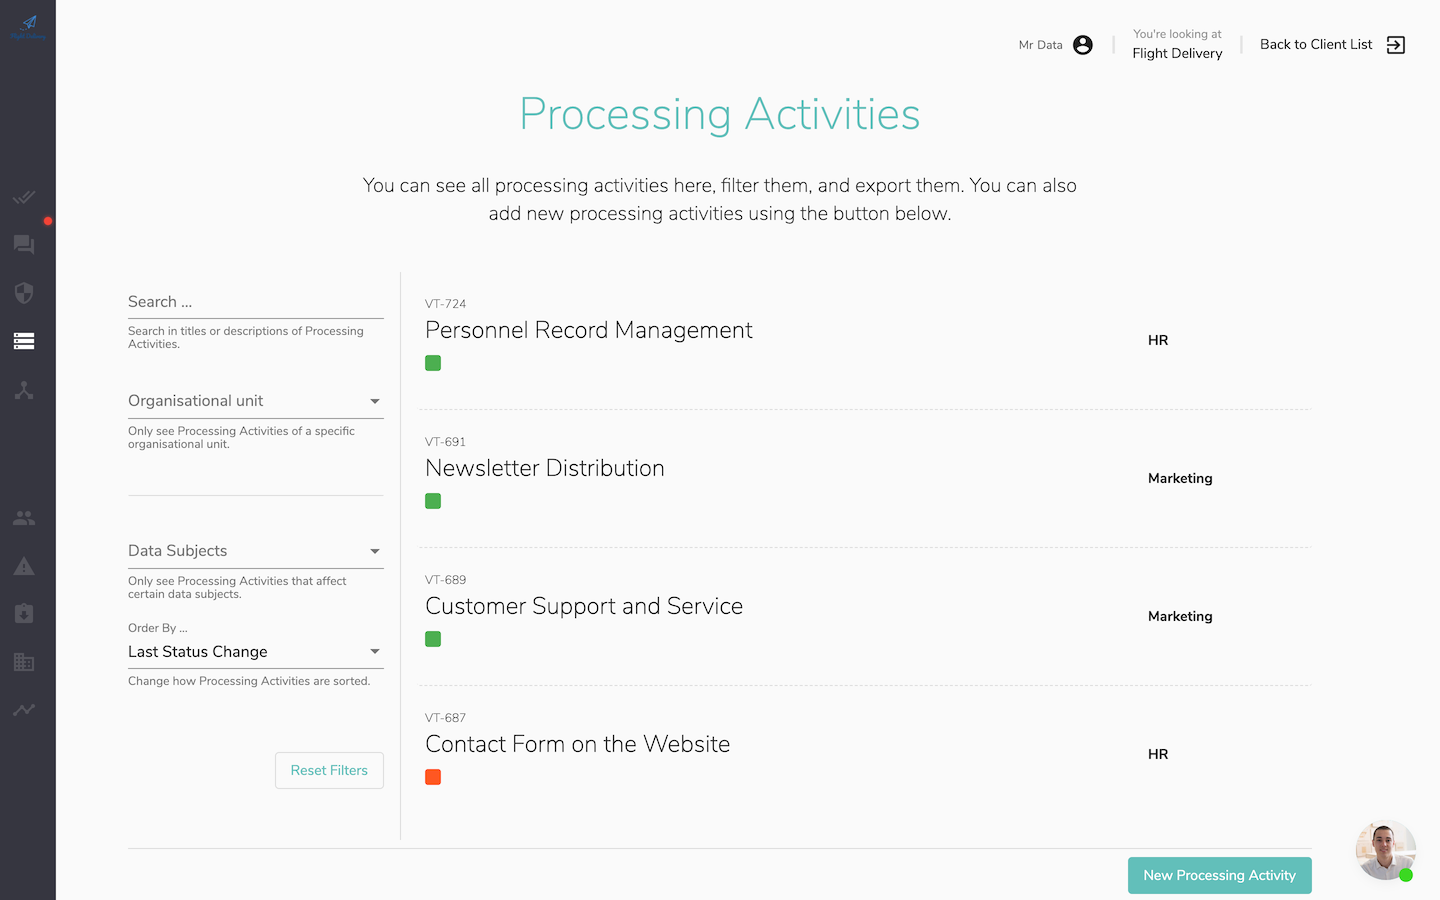 Manage Records of Processing Activities